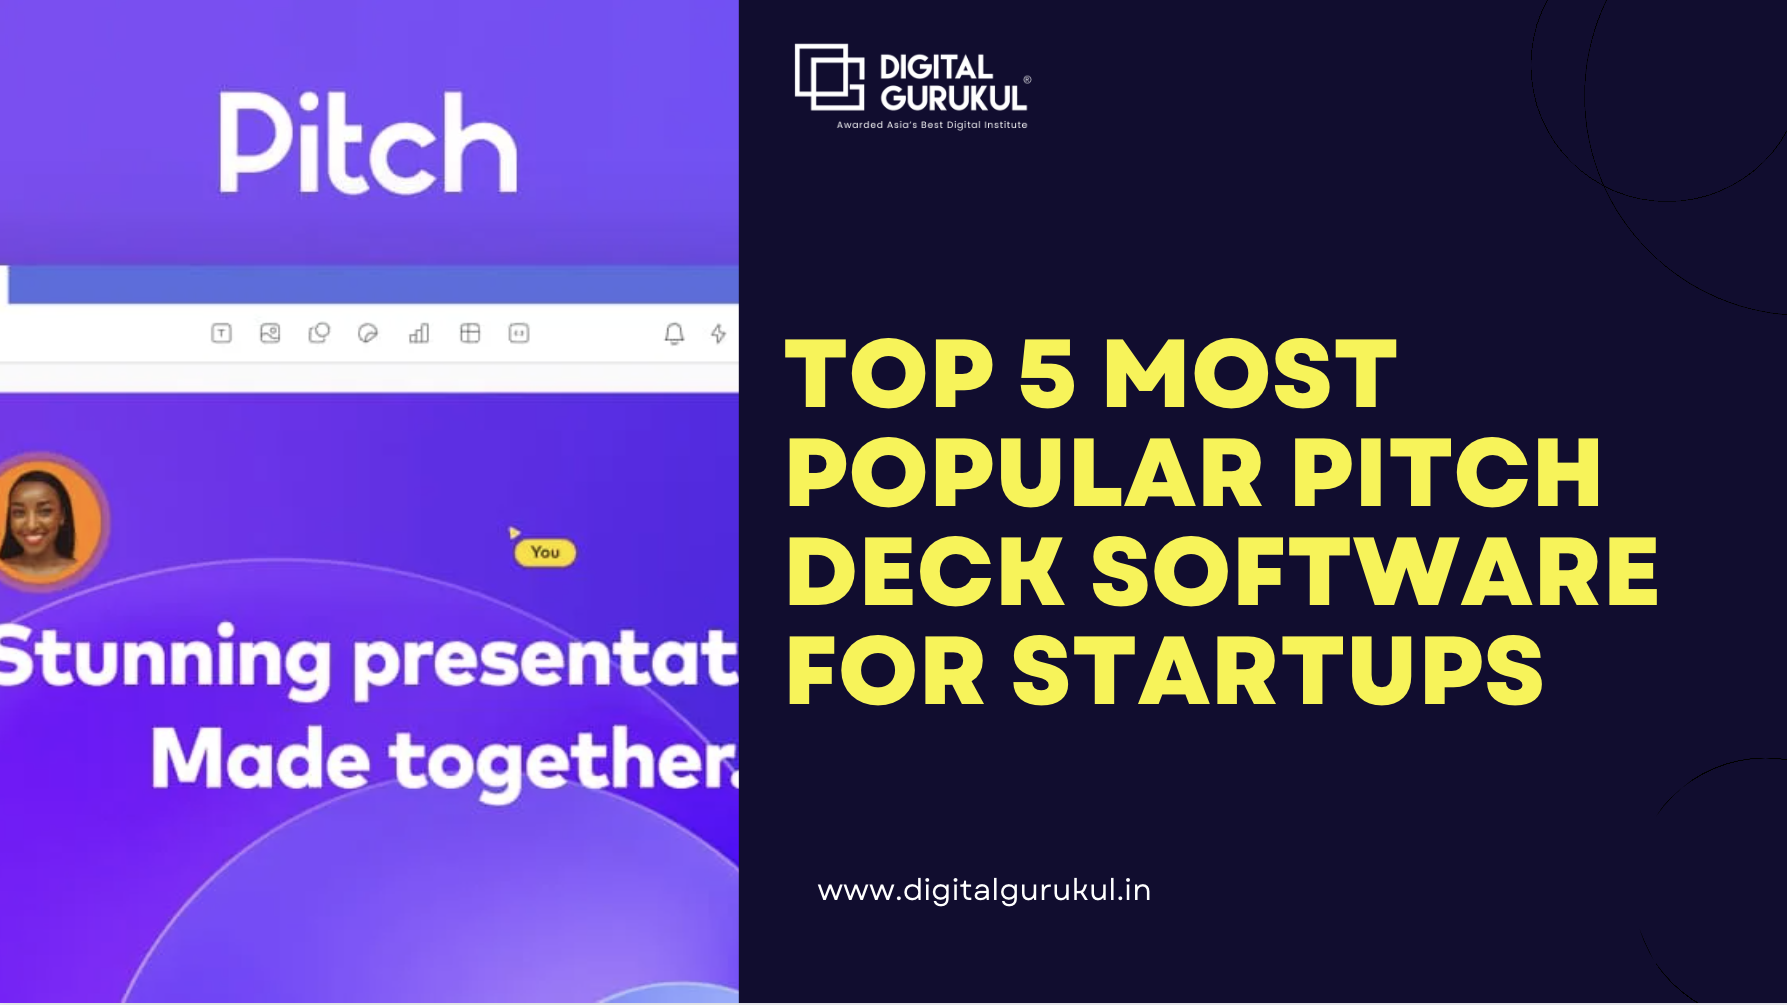 Top 5 most popular Pitch deck software for startups